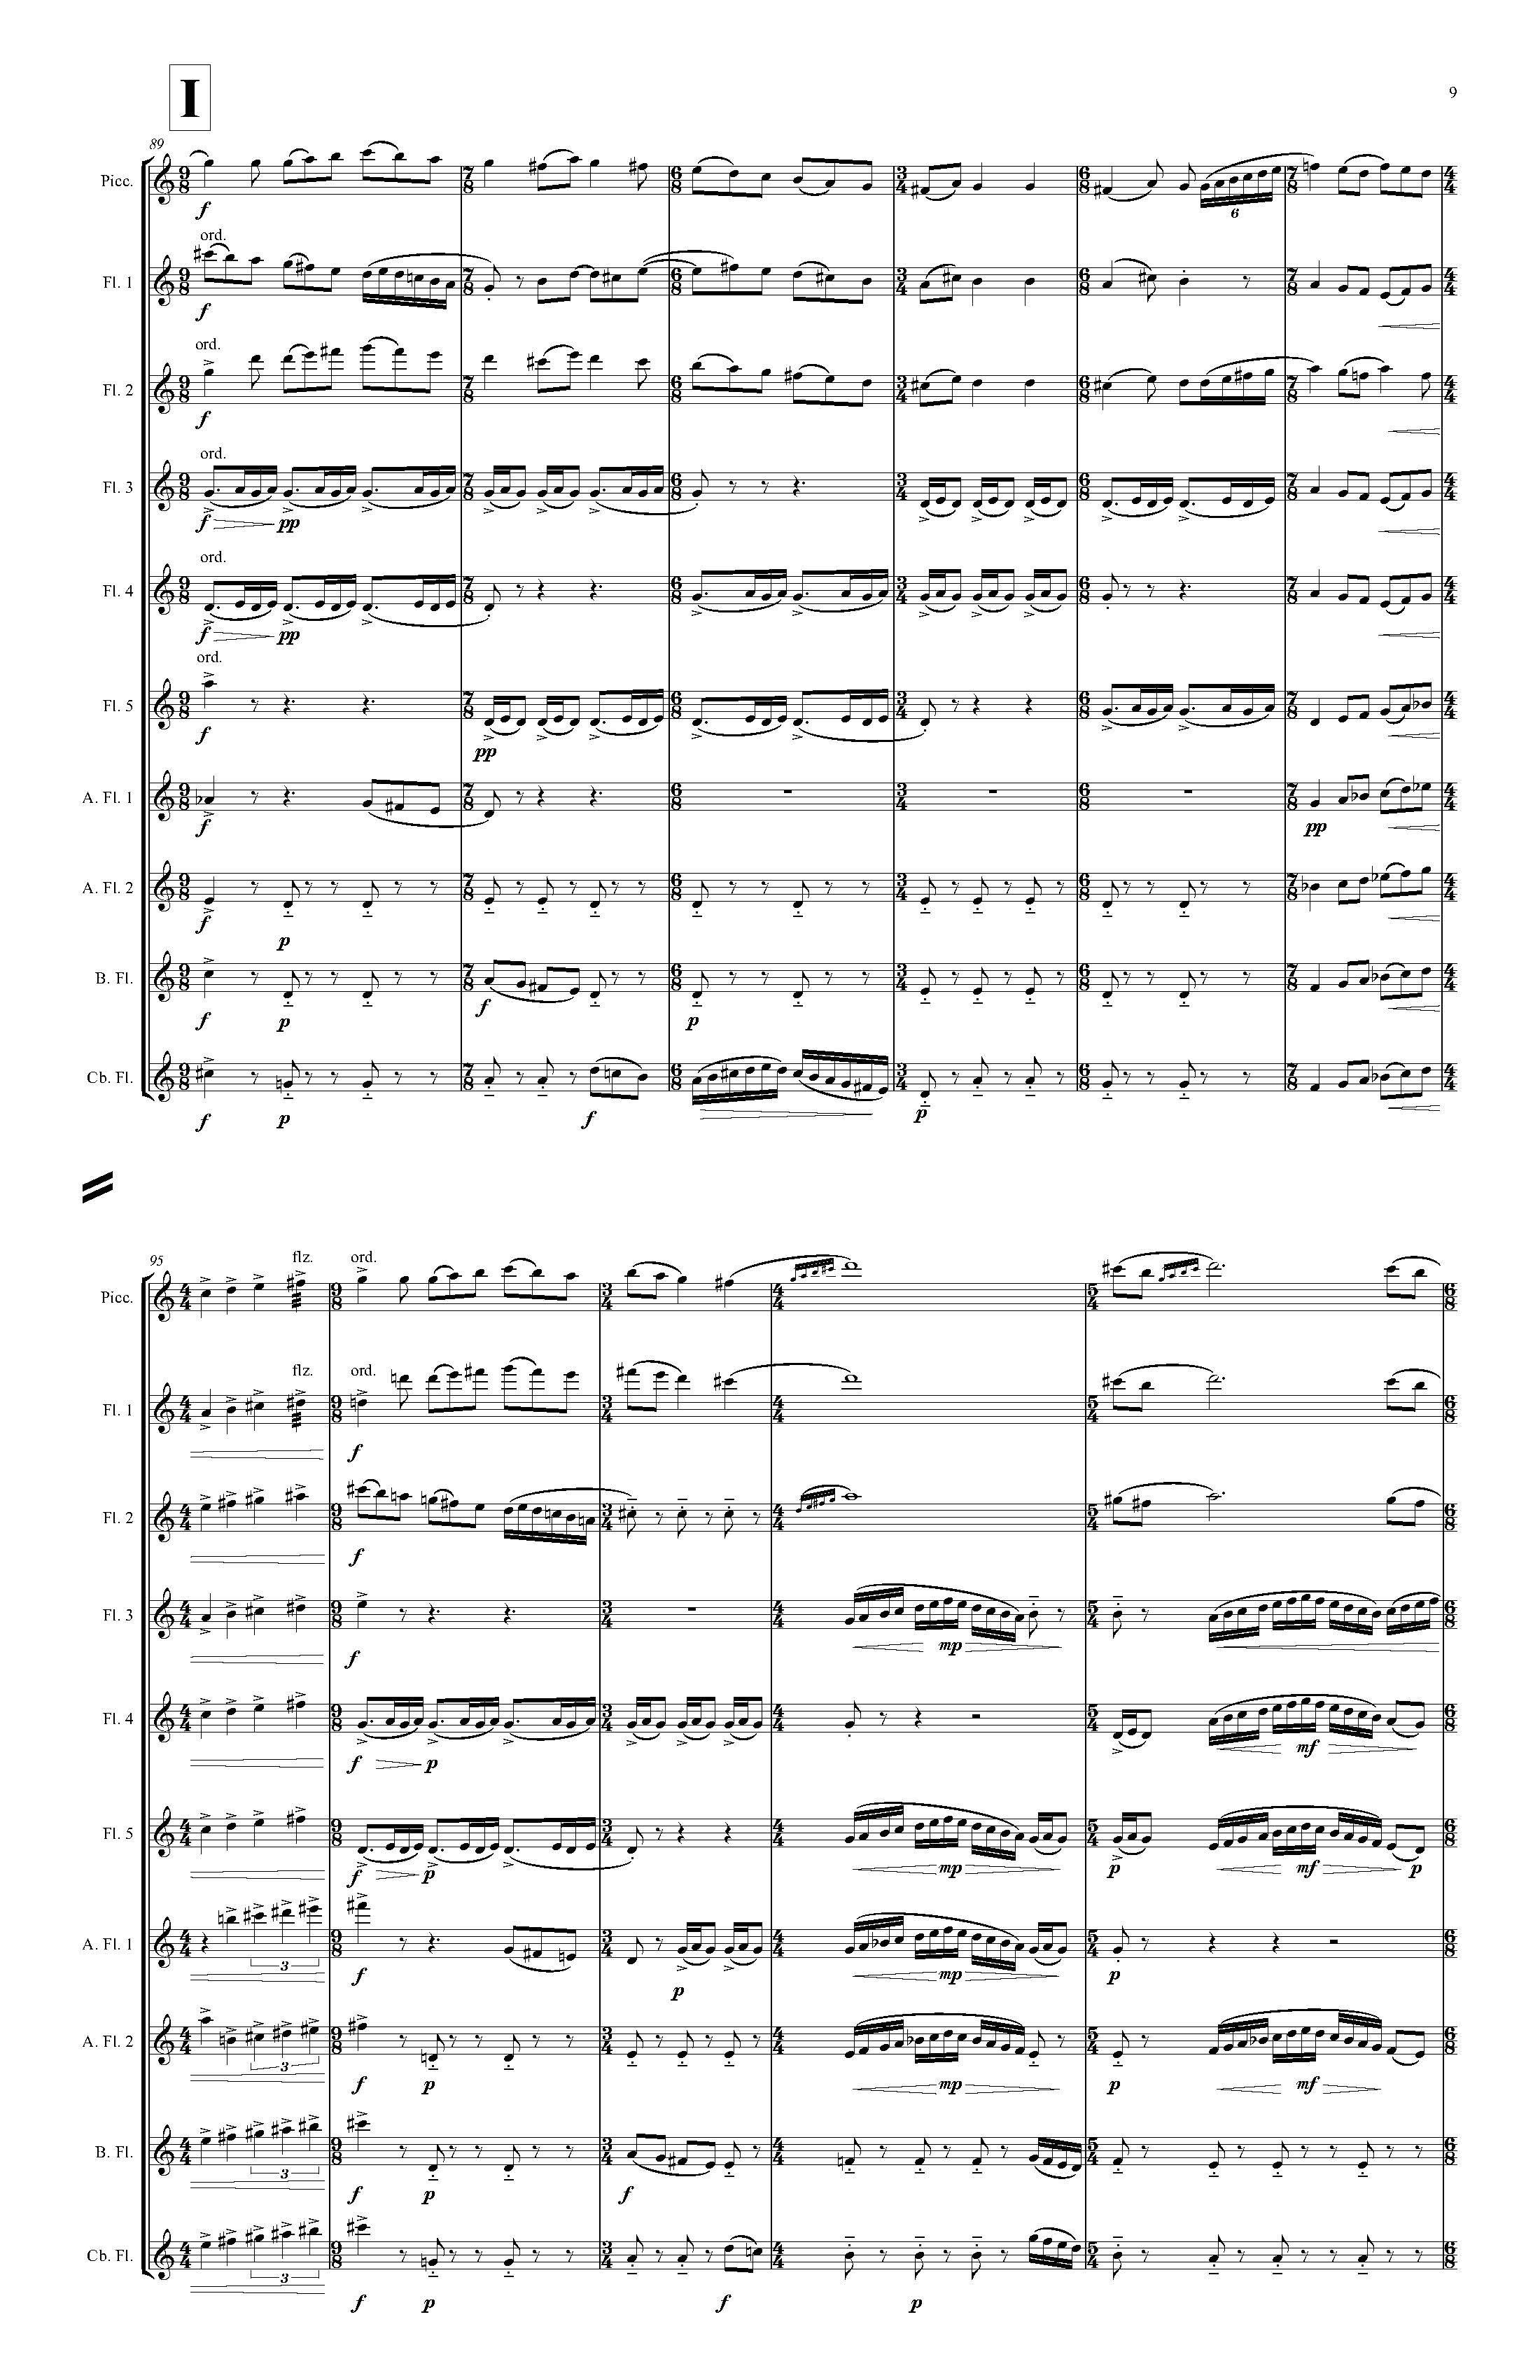 PIPES - Complete Score_Page_15.jpg